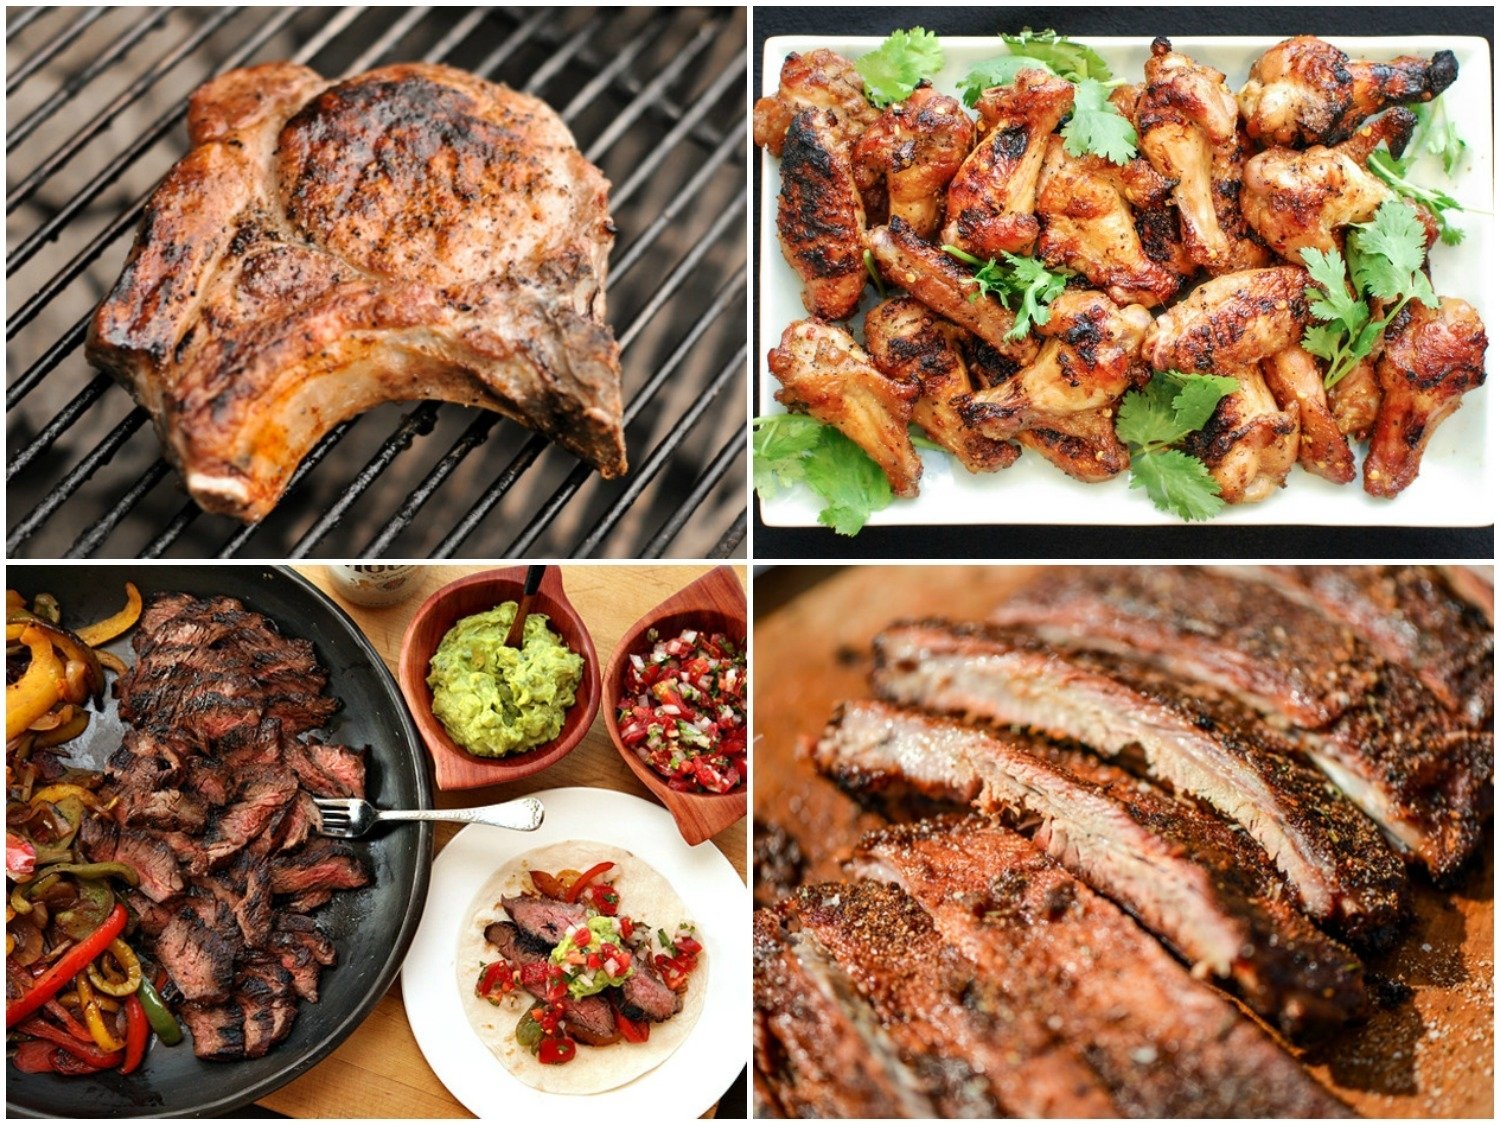 10 Great Fourth Of July Bbq Ideas 16 crowd pleasing recipes for your independence day grill serious eats 3 2022